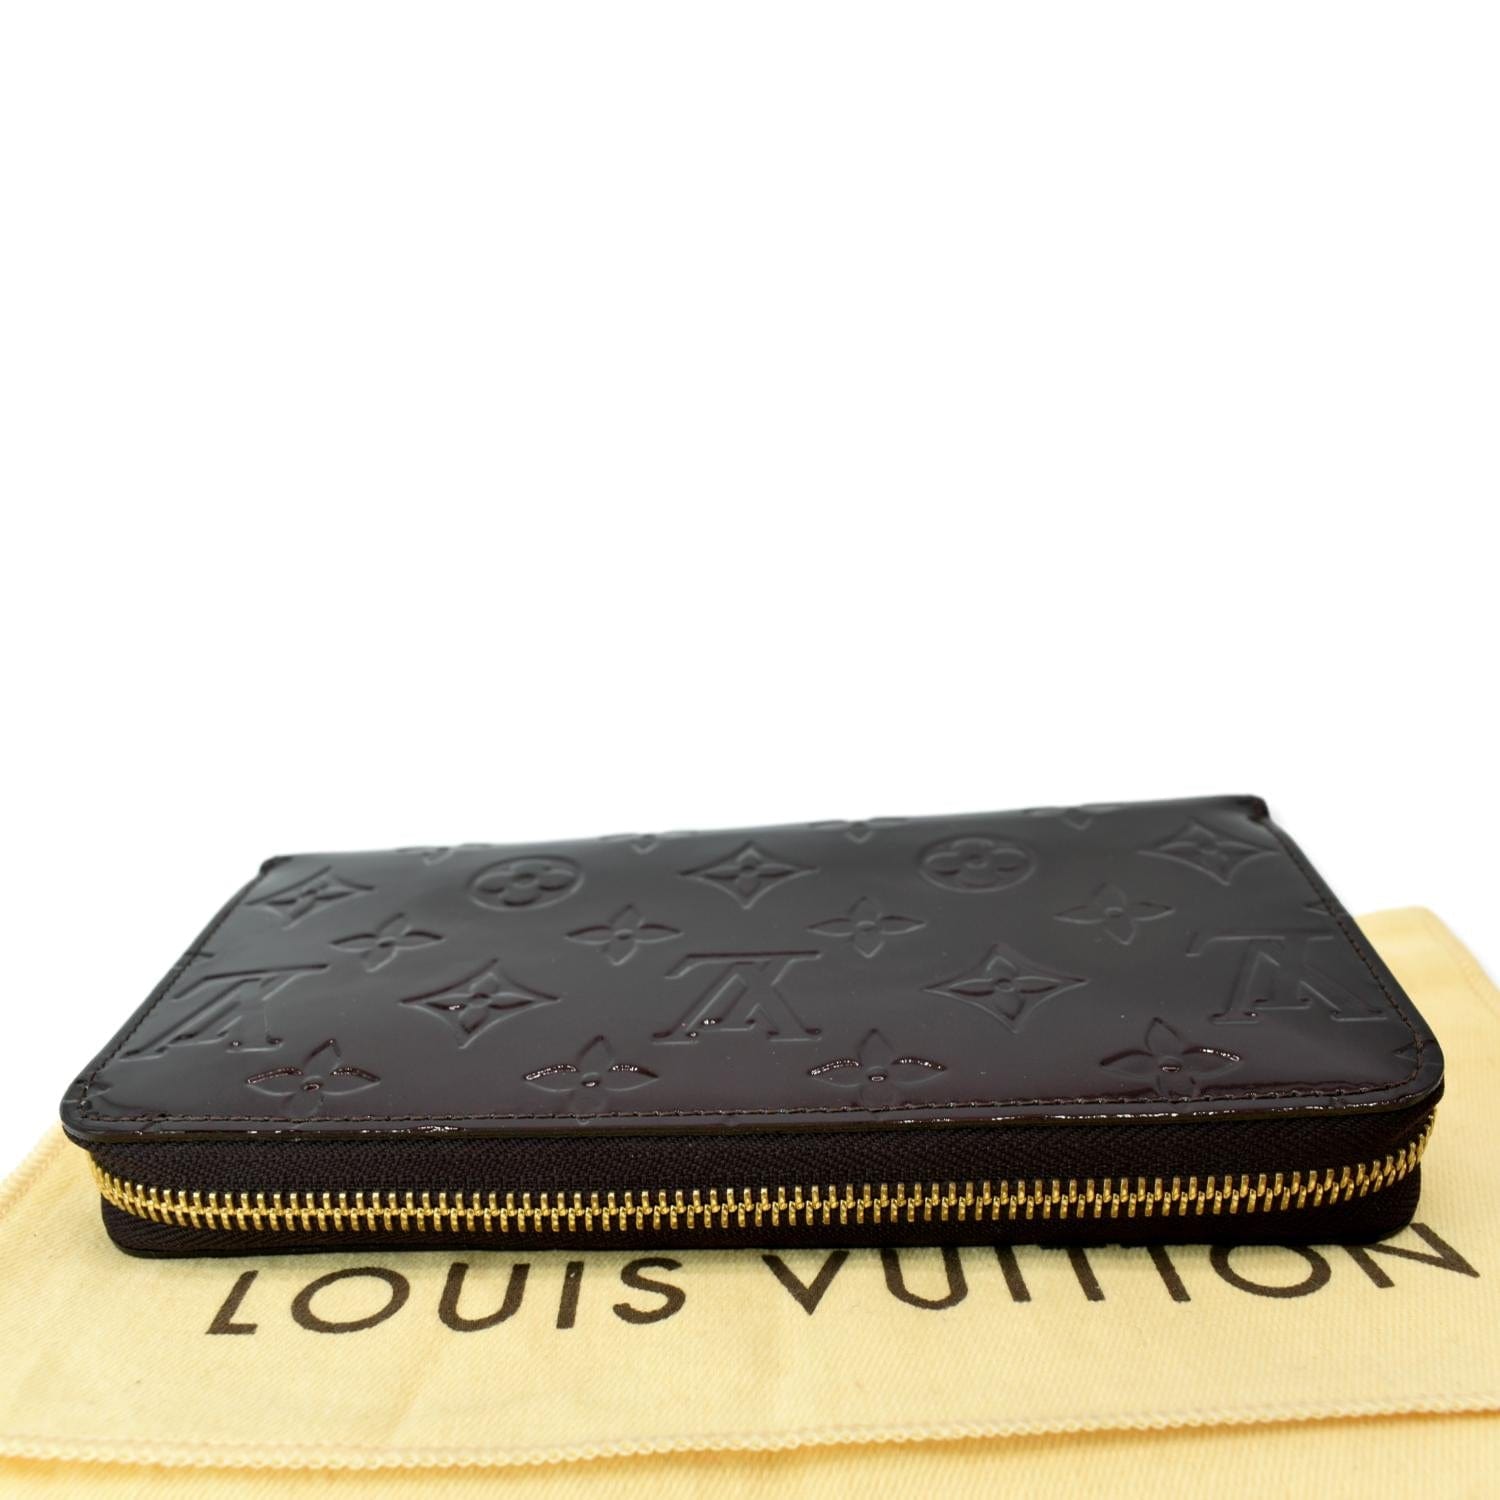 Zippy Wallet Monogram Vernis Leather - Wallets and Small Leather